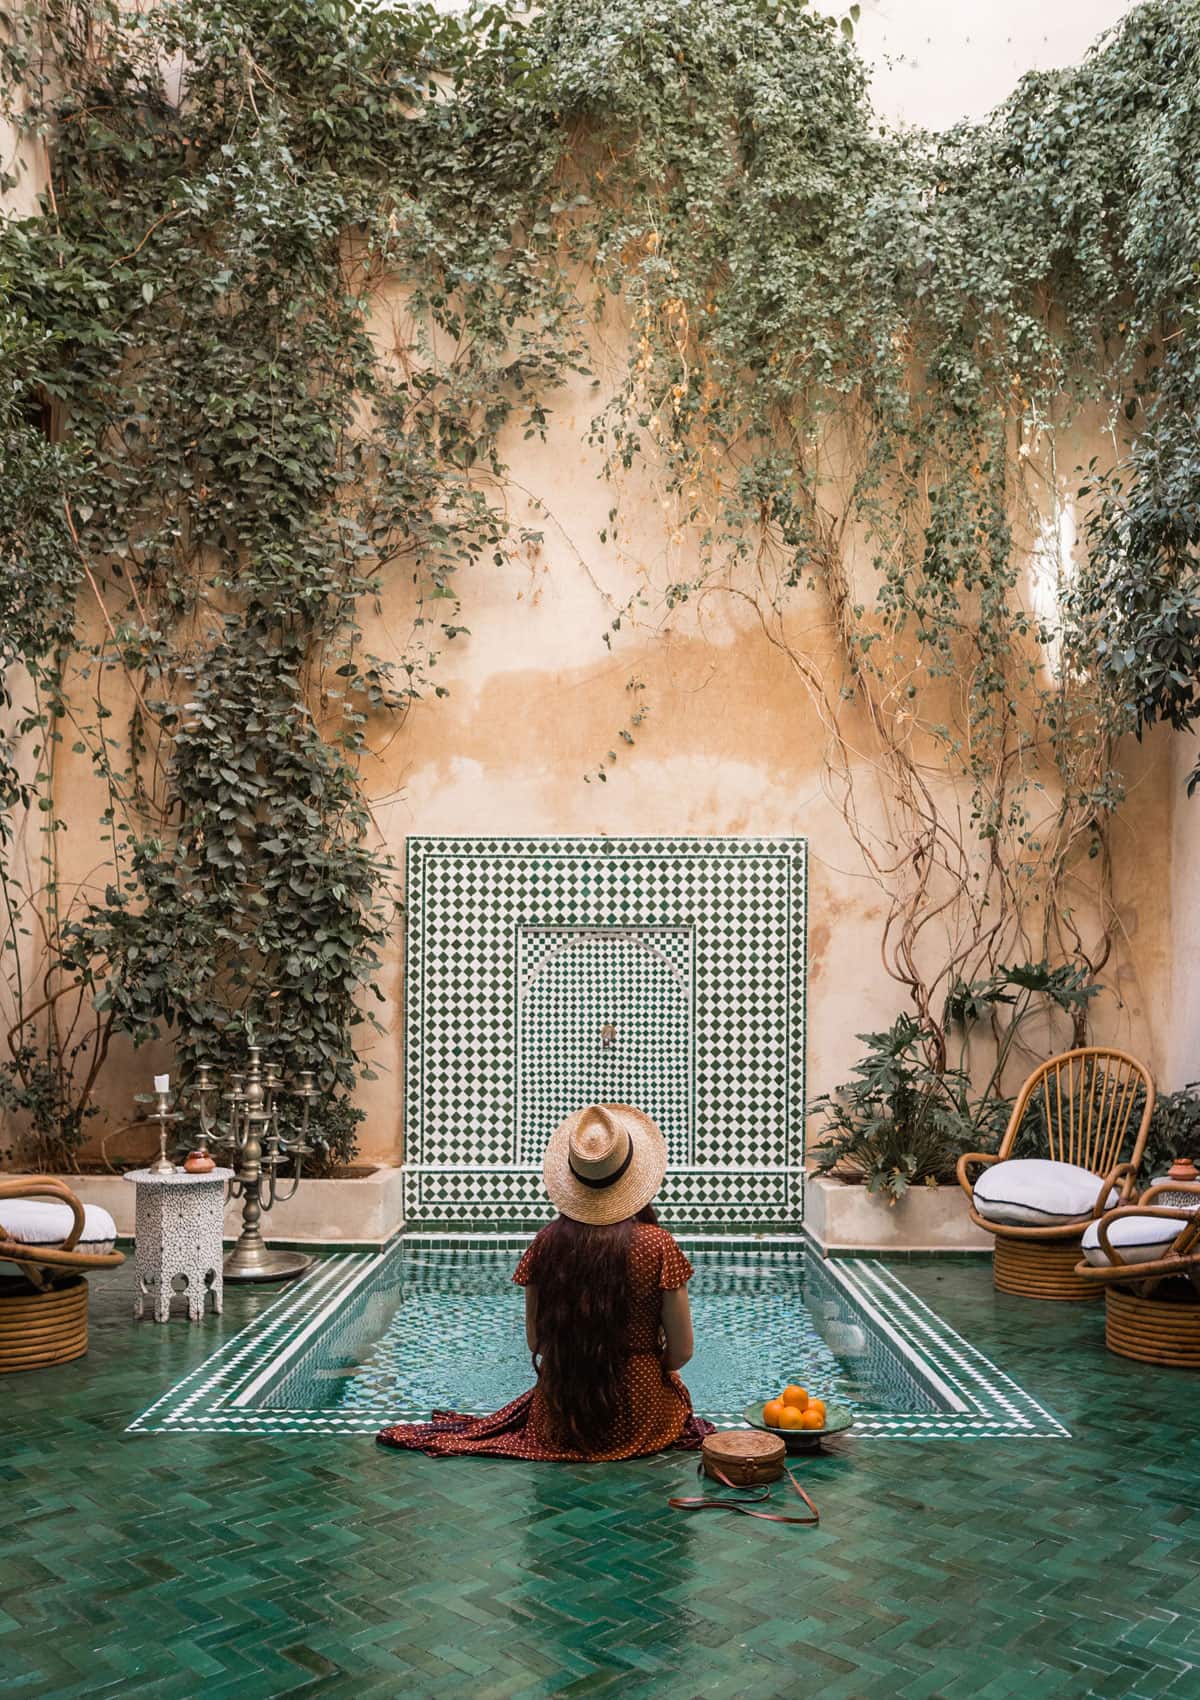 pool in Marrakesh with harlequin checker board tile